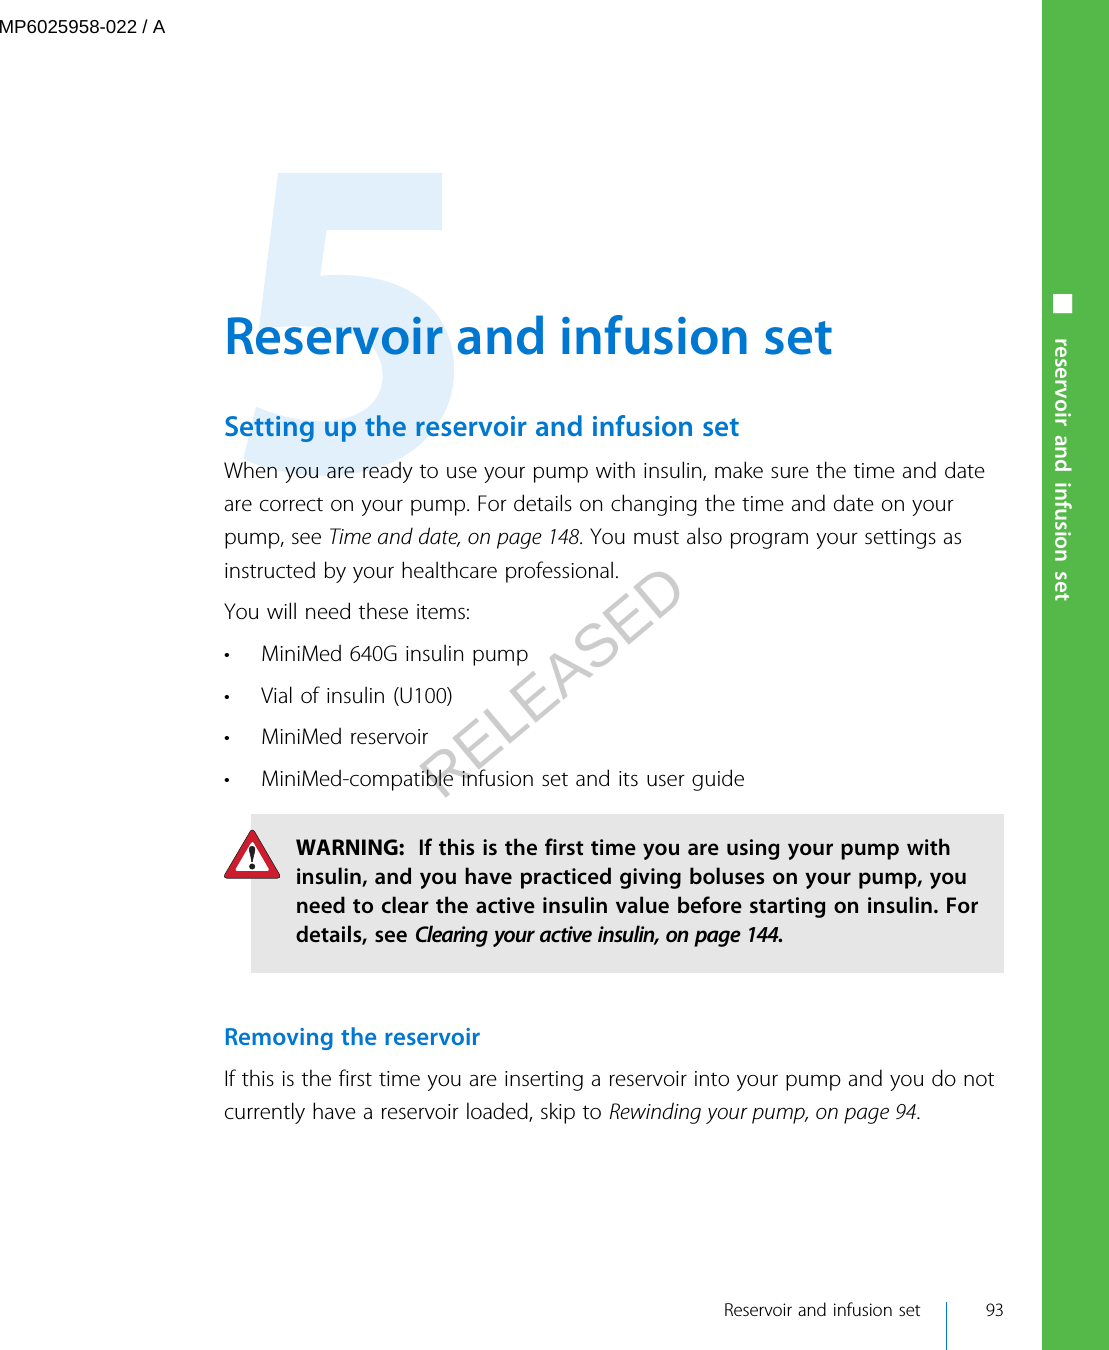  Reservoir and infusion setSetting up the reservoir and infusion setWhen you are ready to use your pump with insulin, make sure the time and dateare correct on your pump. For details on changing the time and date on yourpump, see Time and date, on page 148. You must also program your settings asinstructed by your healthcare professional.You will need these items:• MiniMed 640G insulin pump• Vial of insulin (U100)• MiniMed reservoir• MiniMed-compatible infusion set and its user guideWARNING:  If this is the first time you are using your pump withinsulin, and you have practiced giving boluses on your pump, youneed to clear the active insulin value before starting on insulin. Fordetails, see Clearing your active insulin, on page 144.Removing the reservoirIf this is the first time you are inserting a reservoir into your pump and you do notcurrently have a reservoir loaded, skip to Rewinding your pump, on page 94. Reservoir and infusion set 93■ reservoir and infusion setMP6025958-022 / ARELEASED